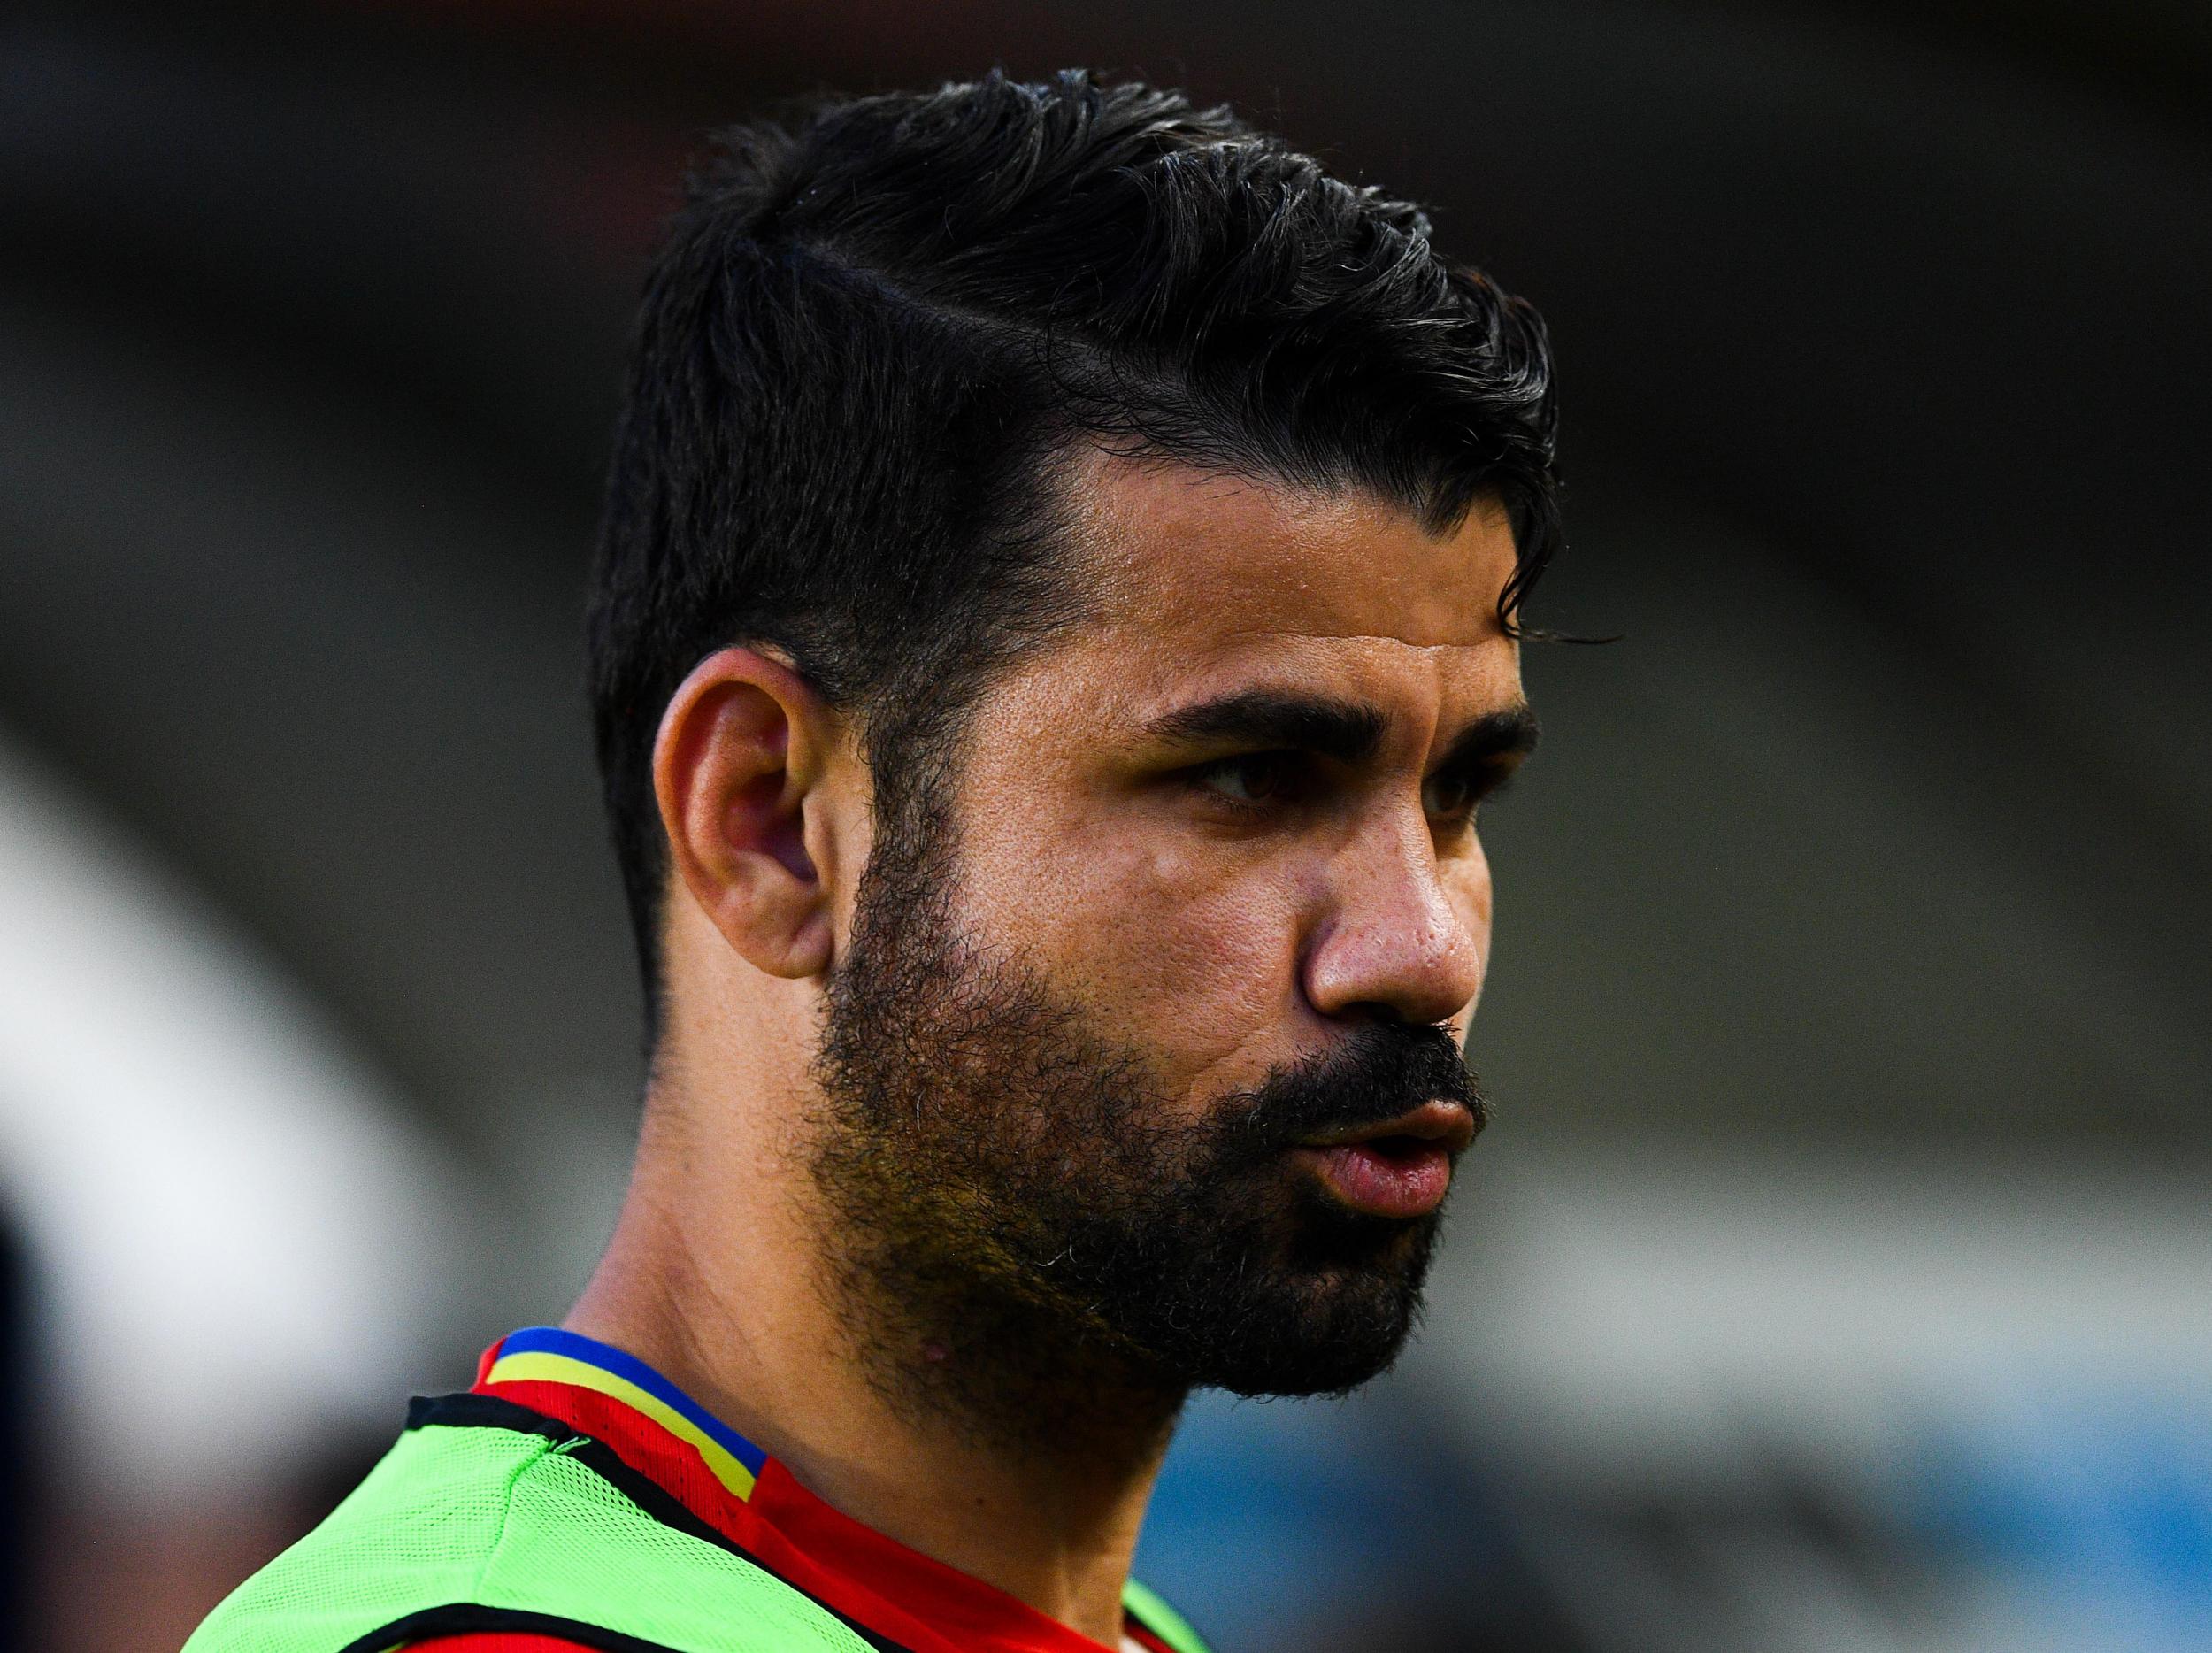 Costa has been told he has no future at Chelsea